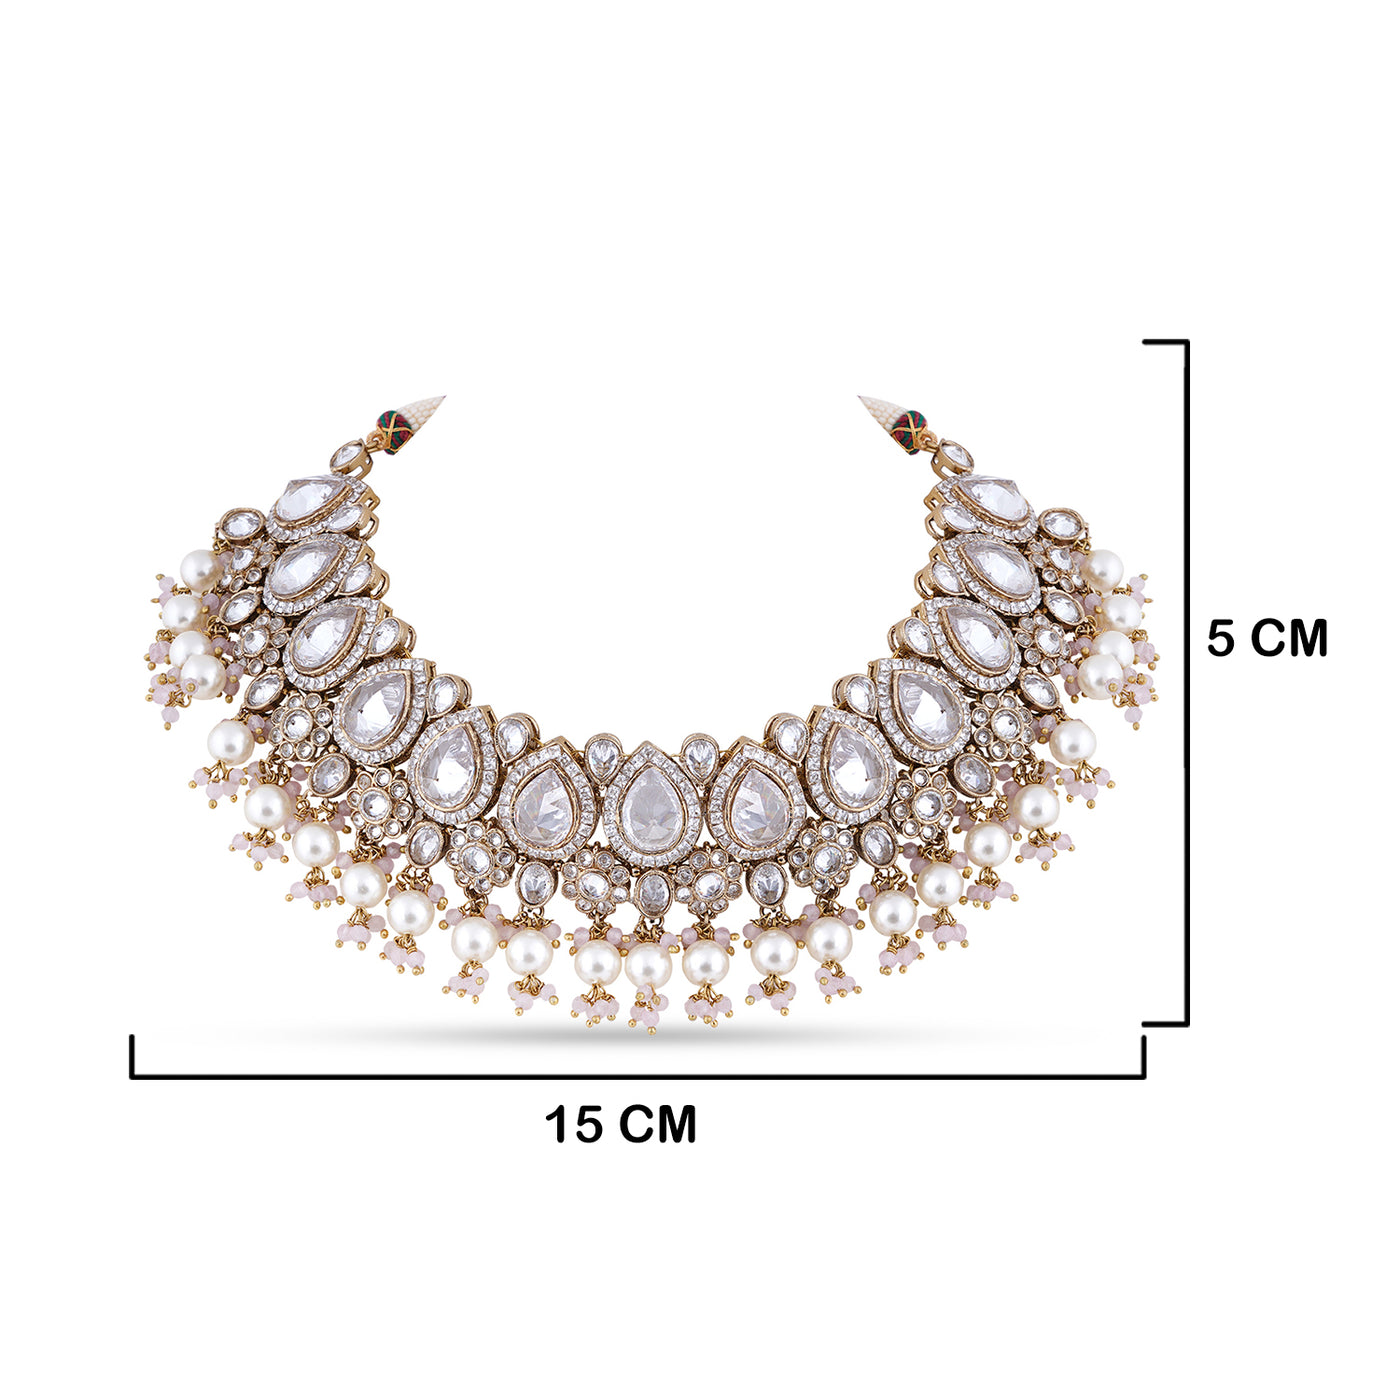 American Diamond and Pearl Drop Choker with measurements in cm. 15cm by 5cm.